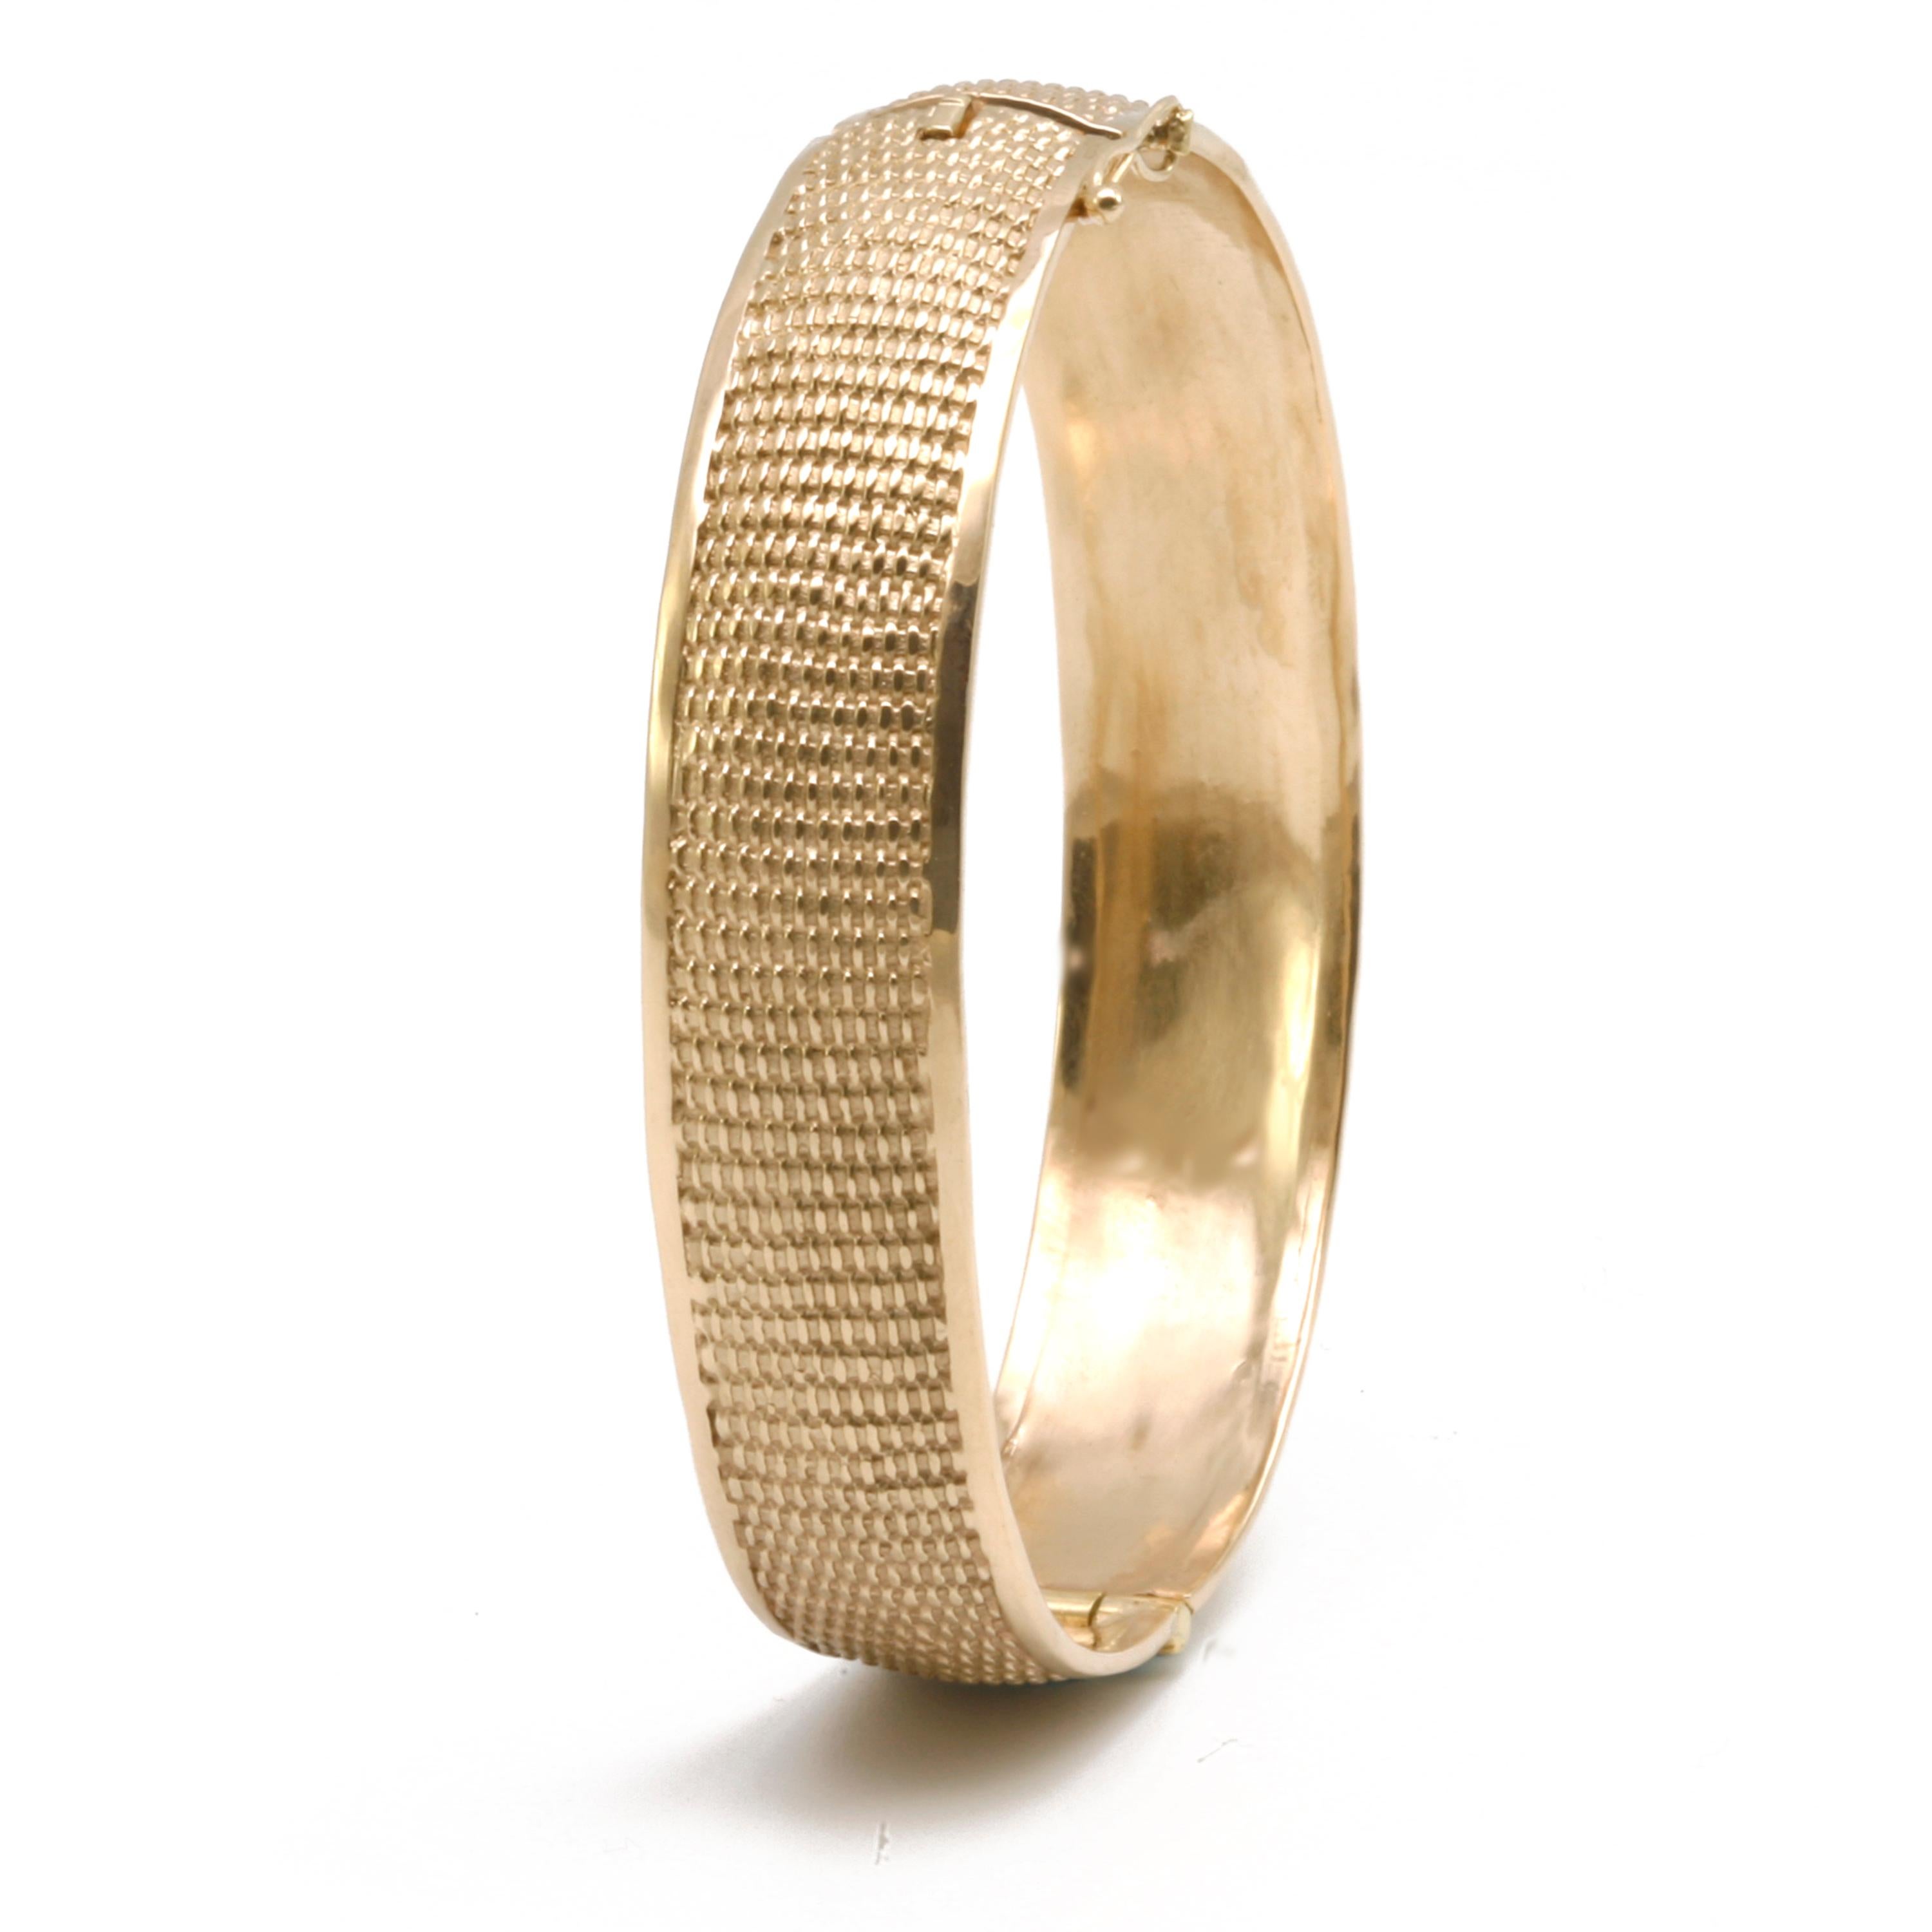 A well-known texture known as a Nantucket Basket Weave is presented here in a substantial woven textured Hinged Bangle in 14k Gold. Available in
three sizes. All gold karat and colors. Platinum also available.
The process for making a very precise